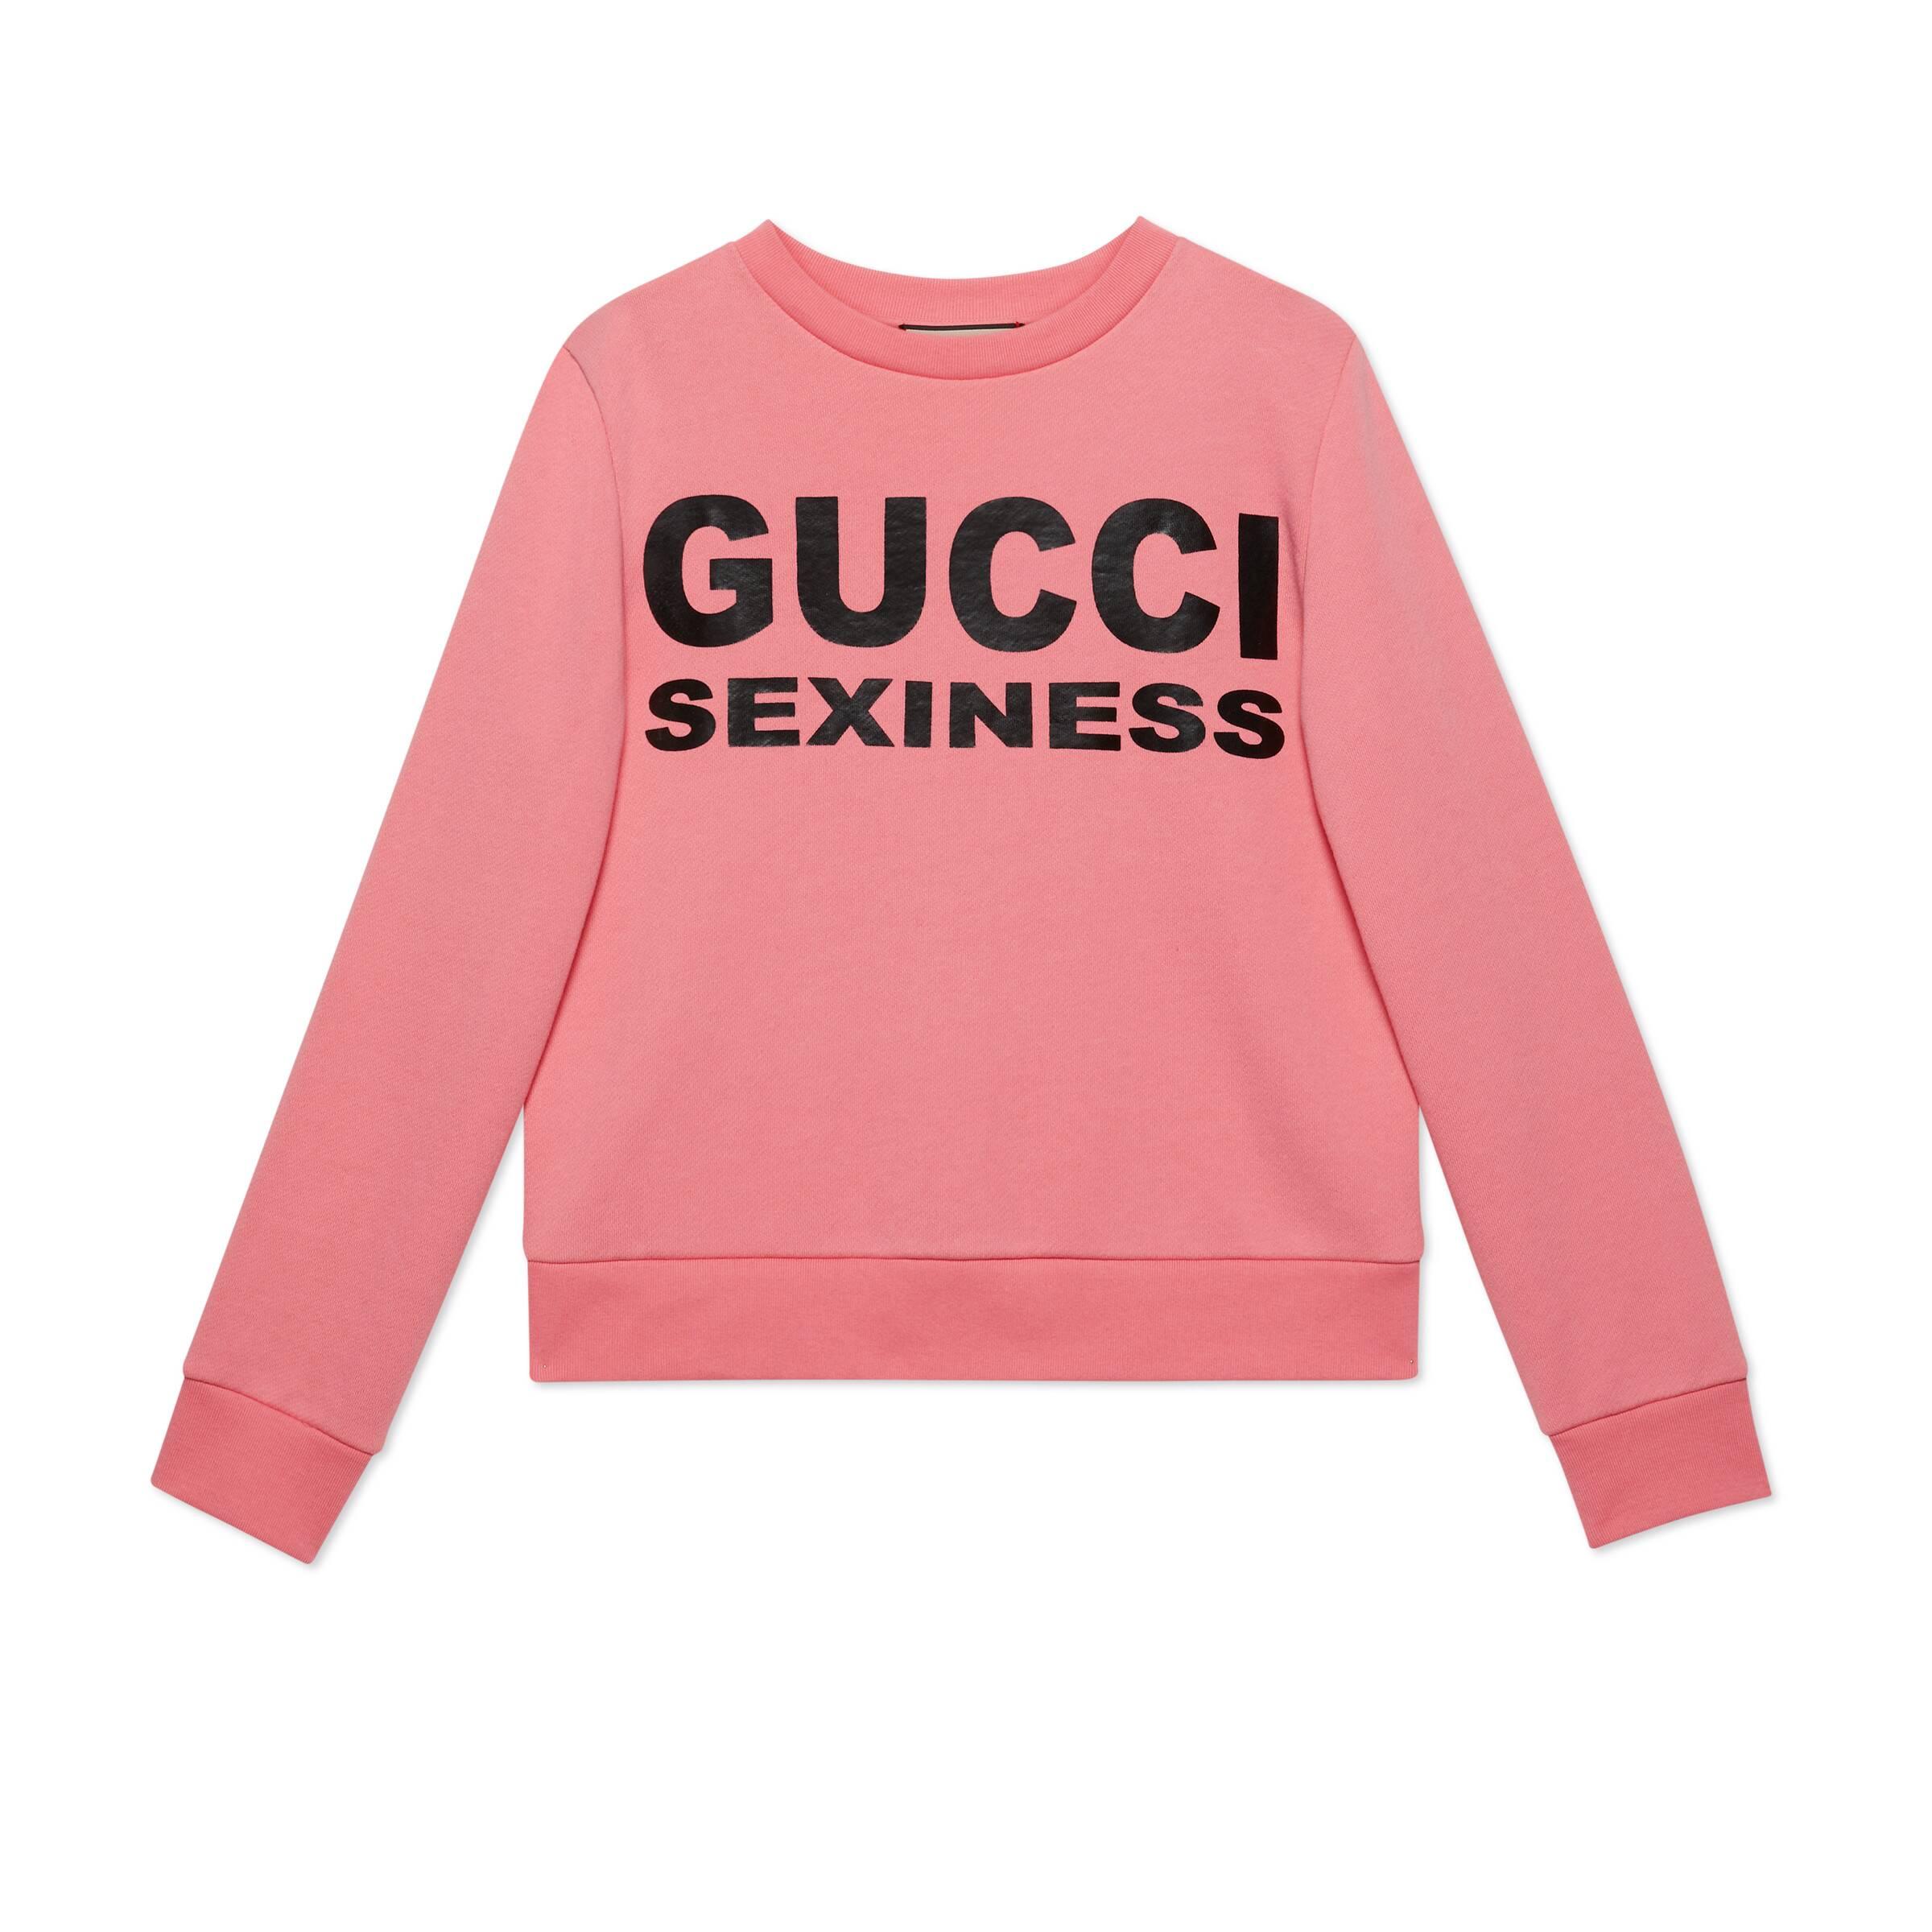 Gucci Sexiness Print Sweatshirt in Pink | Lyst